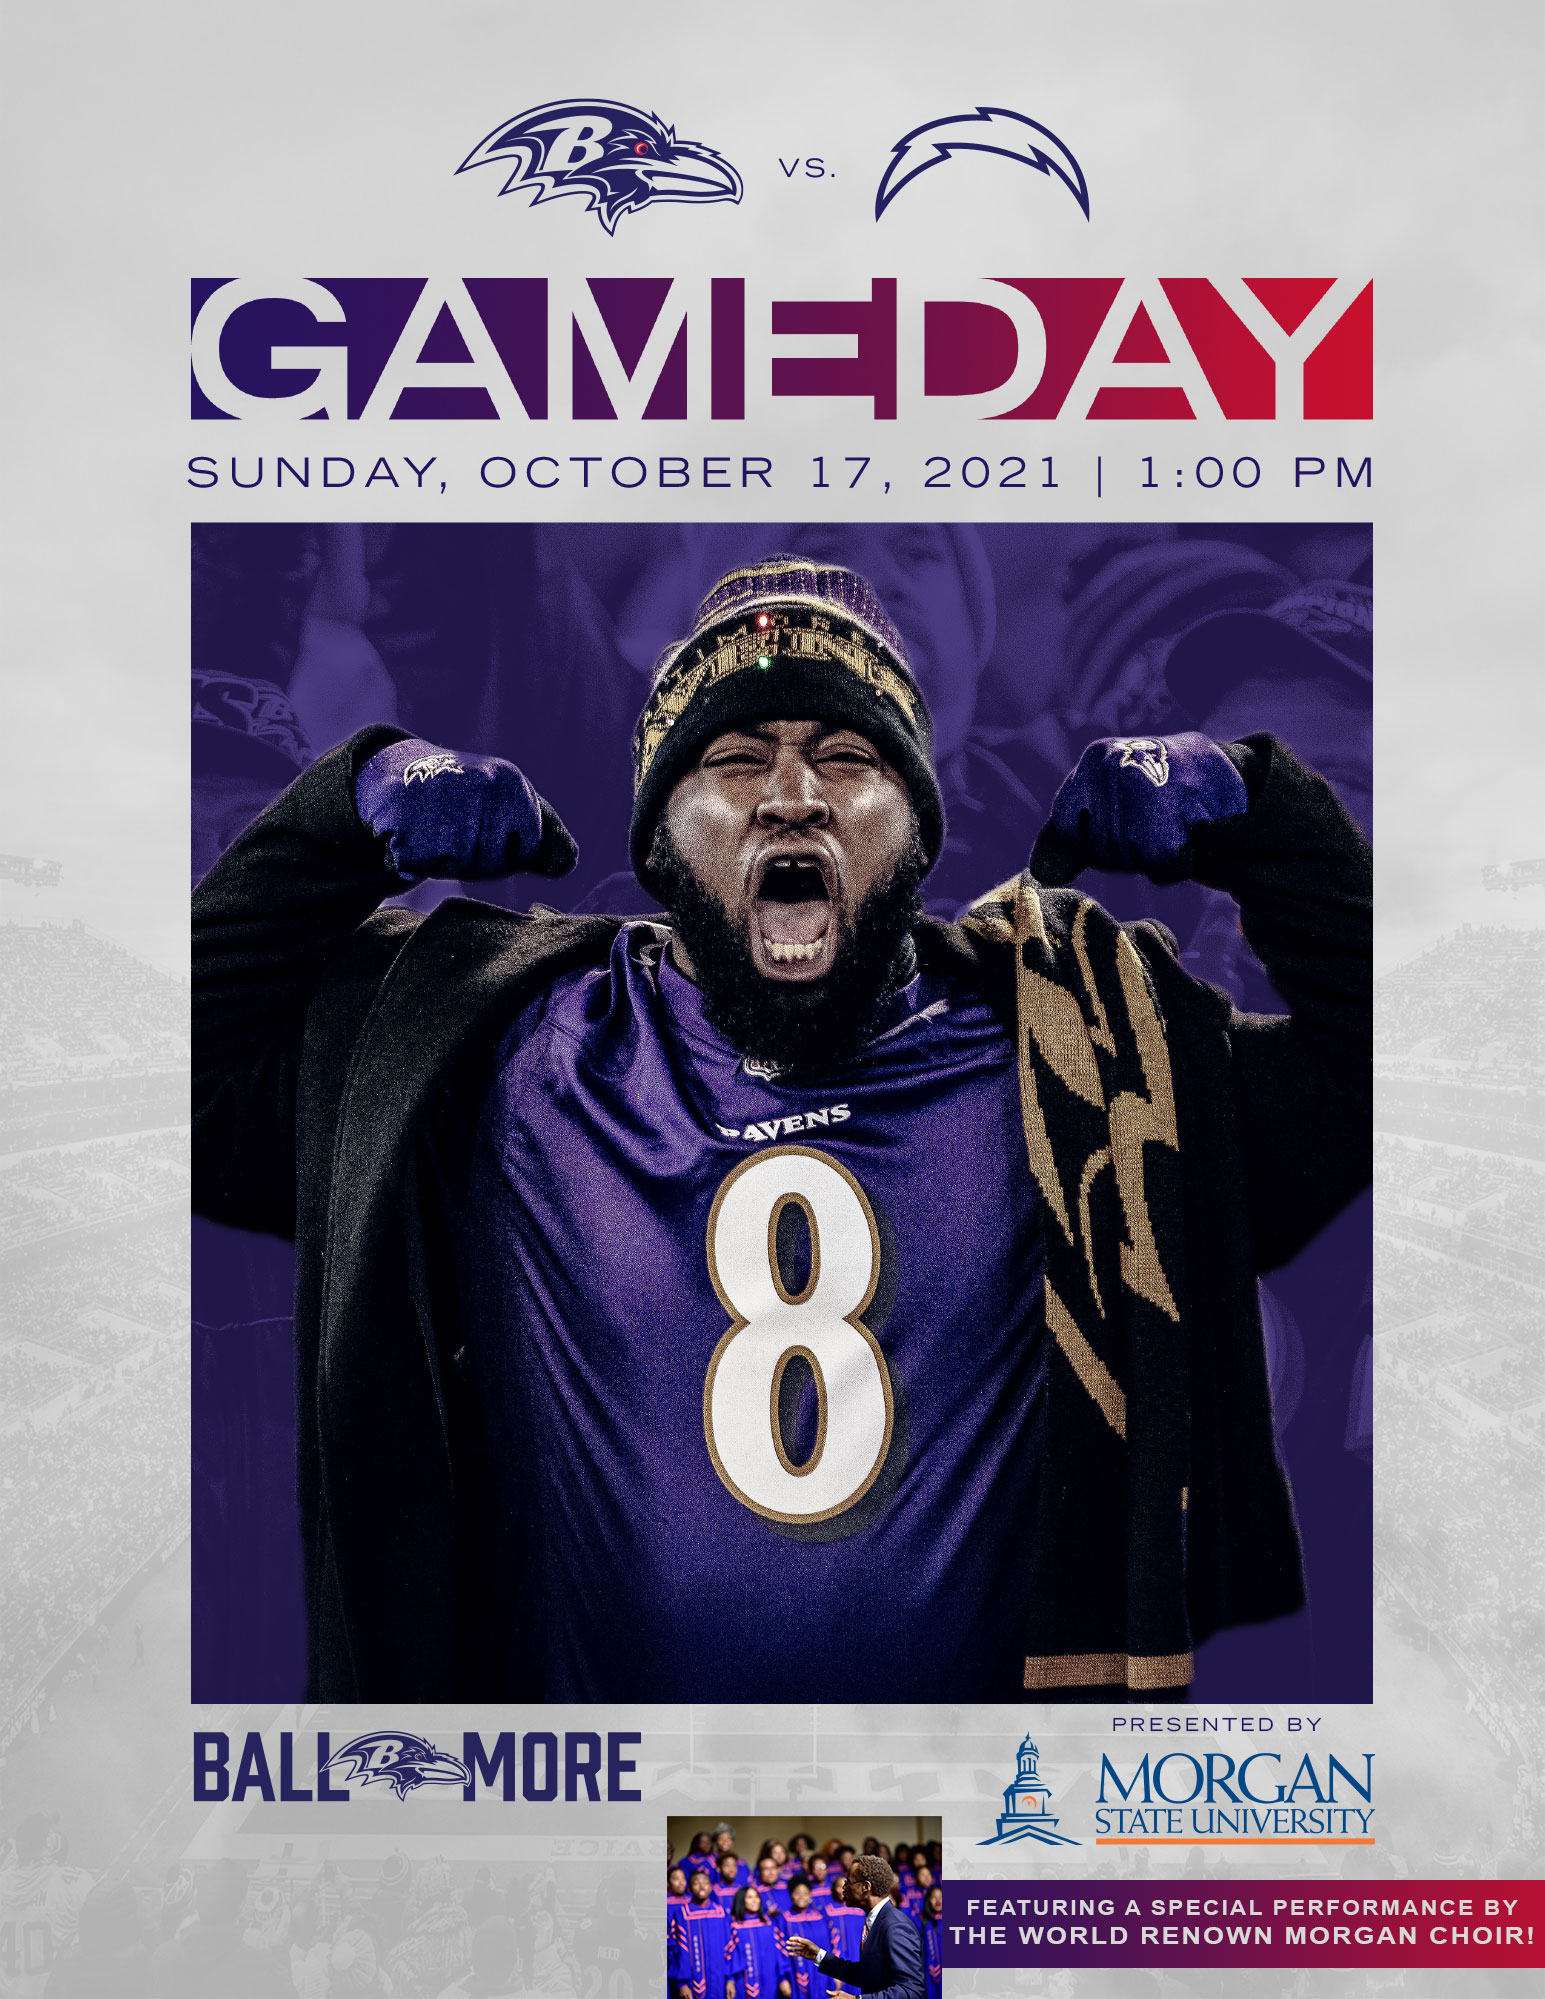 Ravens vs Chargers